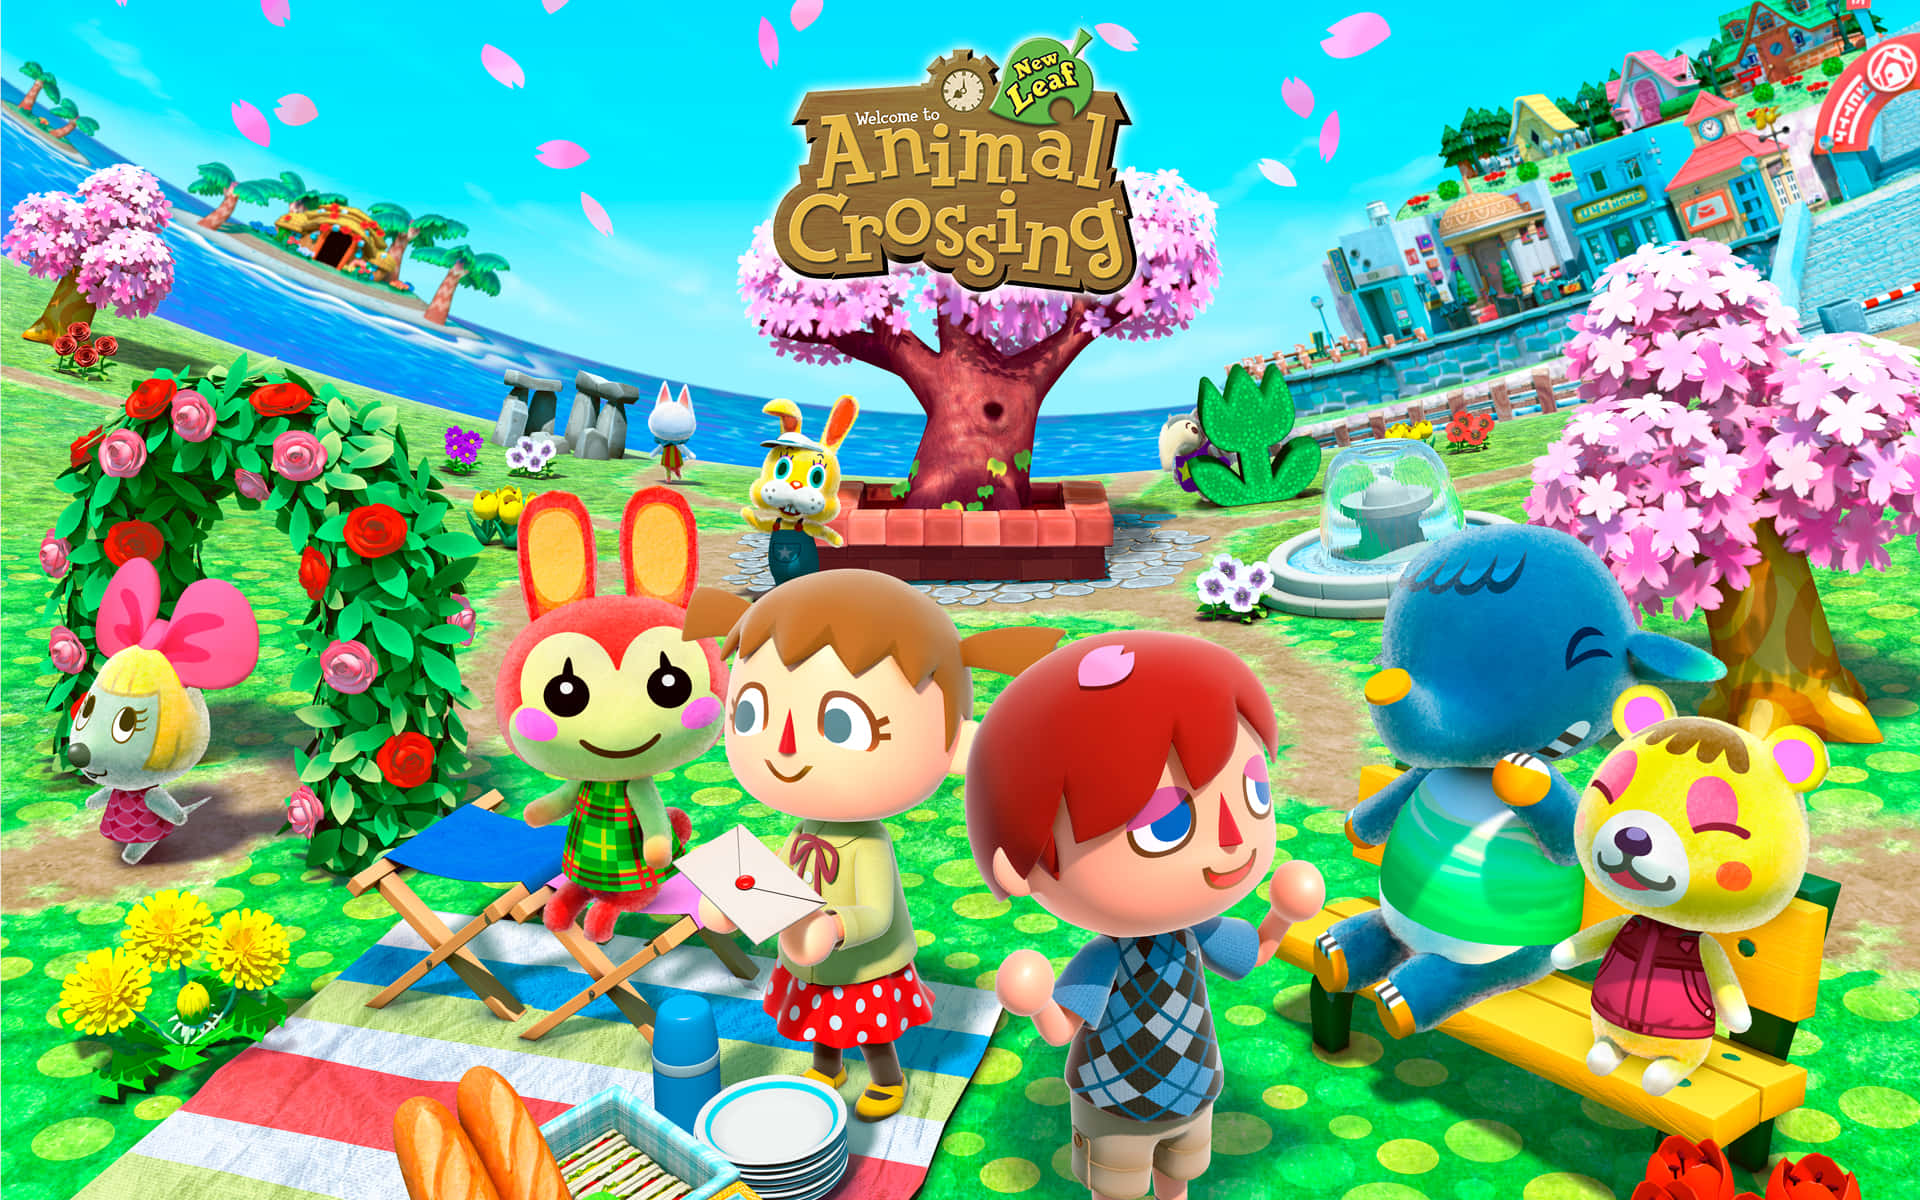 Travel to the world of Animal Crossing!